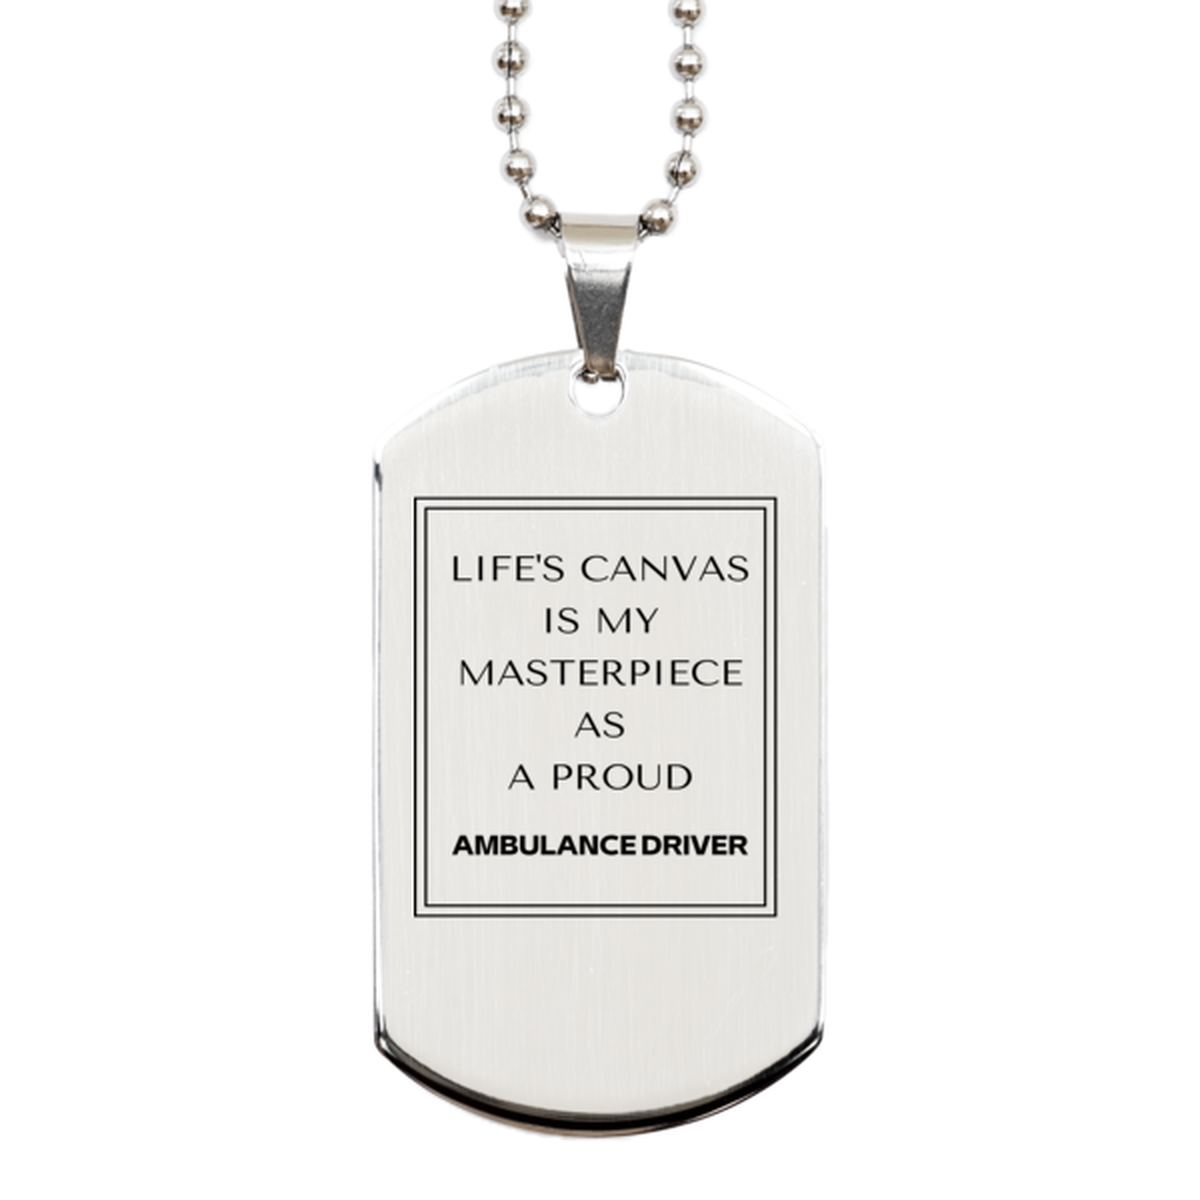 Proud Ambulance Driver Gifts, Life's canvas is my masterpiece, Epic Birthday Christmas Unique Silver Dog Tag For Ambulance Driver, Coworkers, Men, Women, Friends